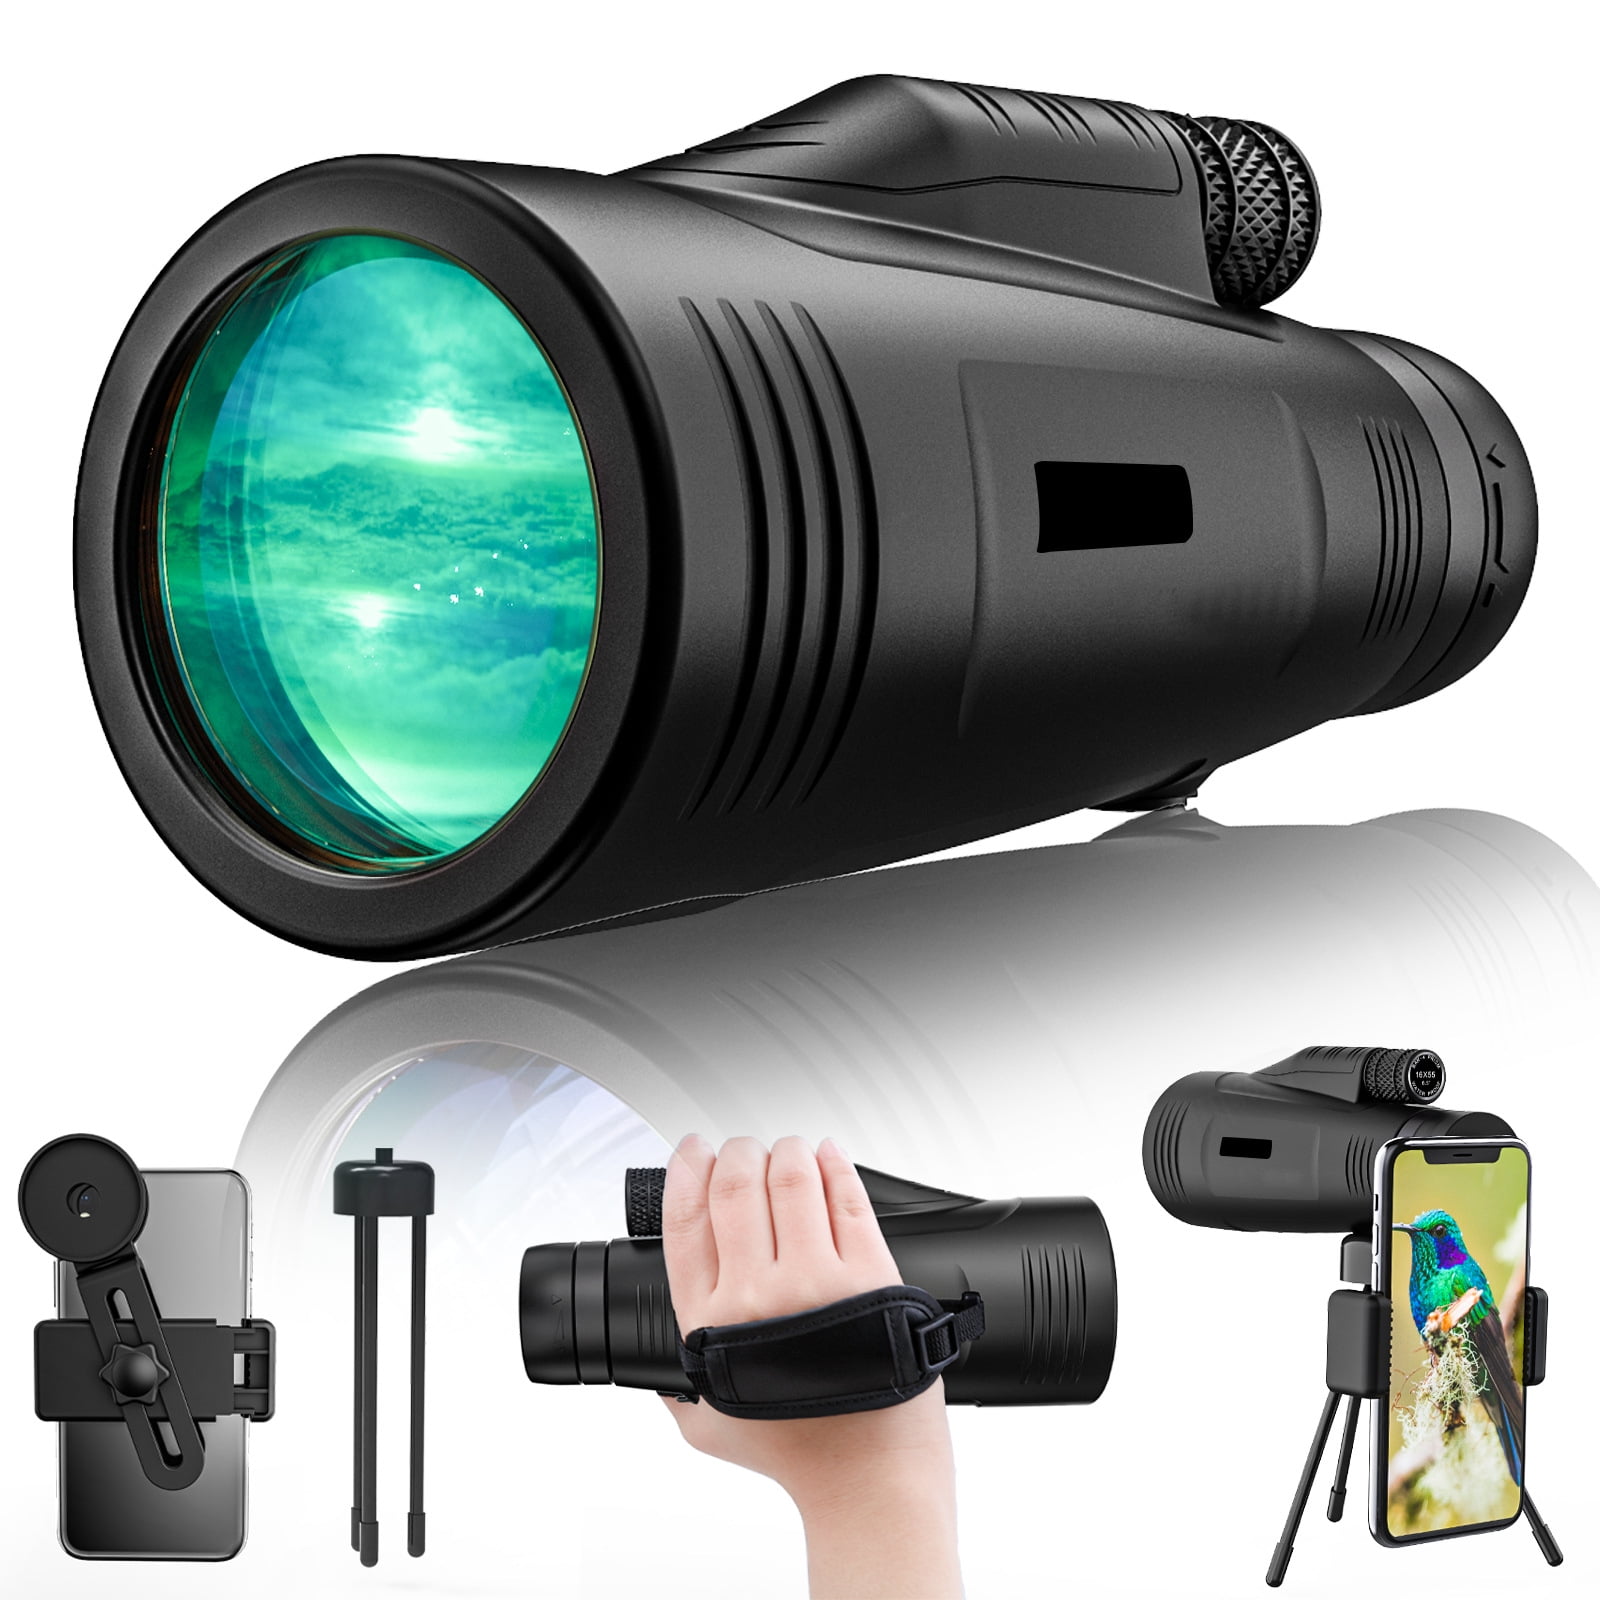 Handheld Zoomable Monocular Telescope Pirate Spyglass For Children Toys Gift FB 